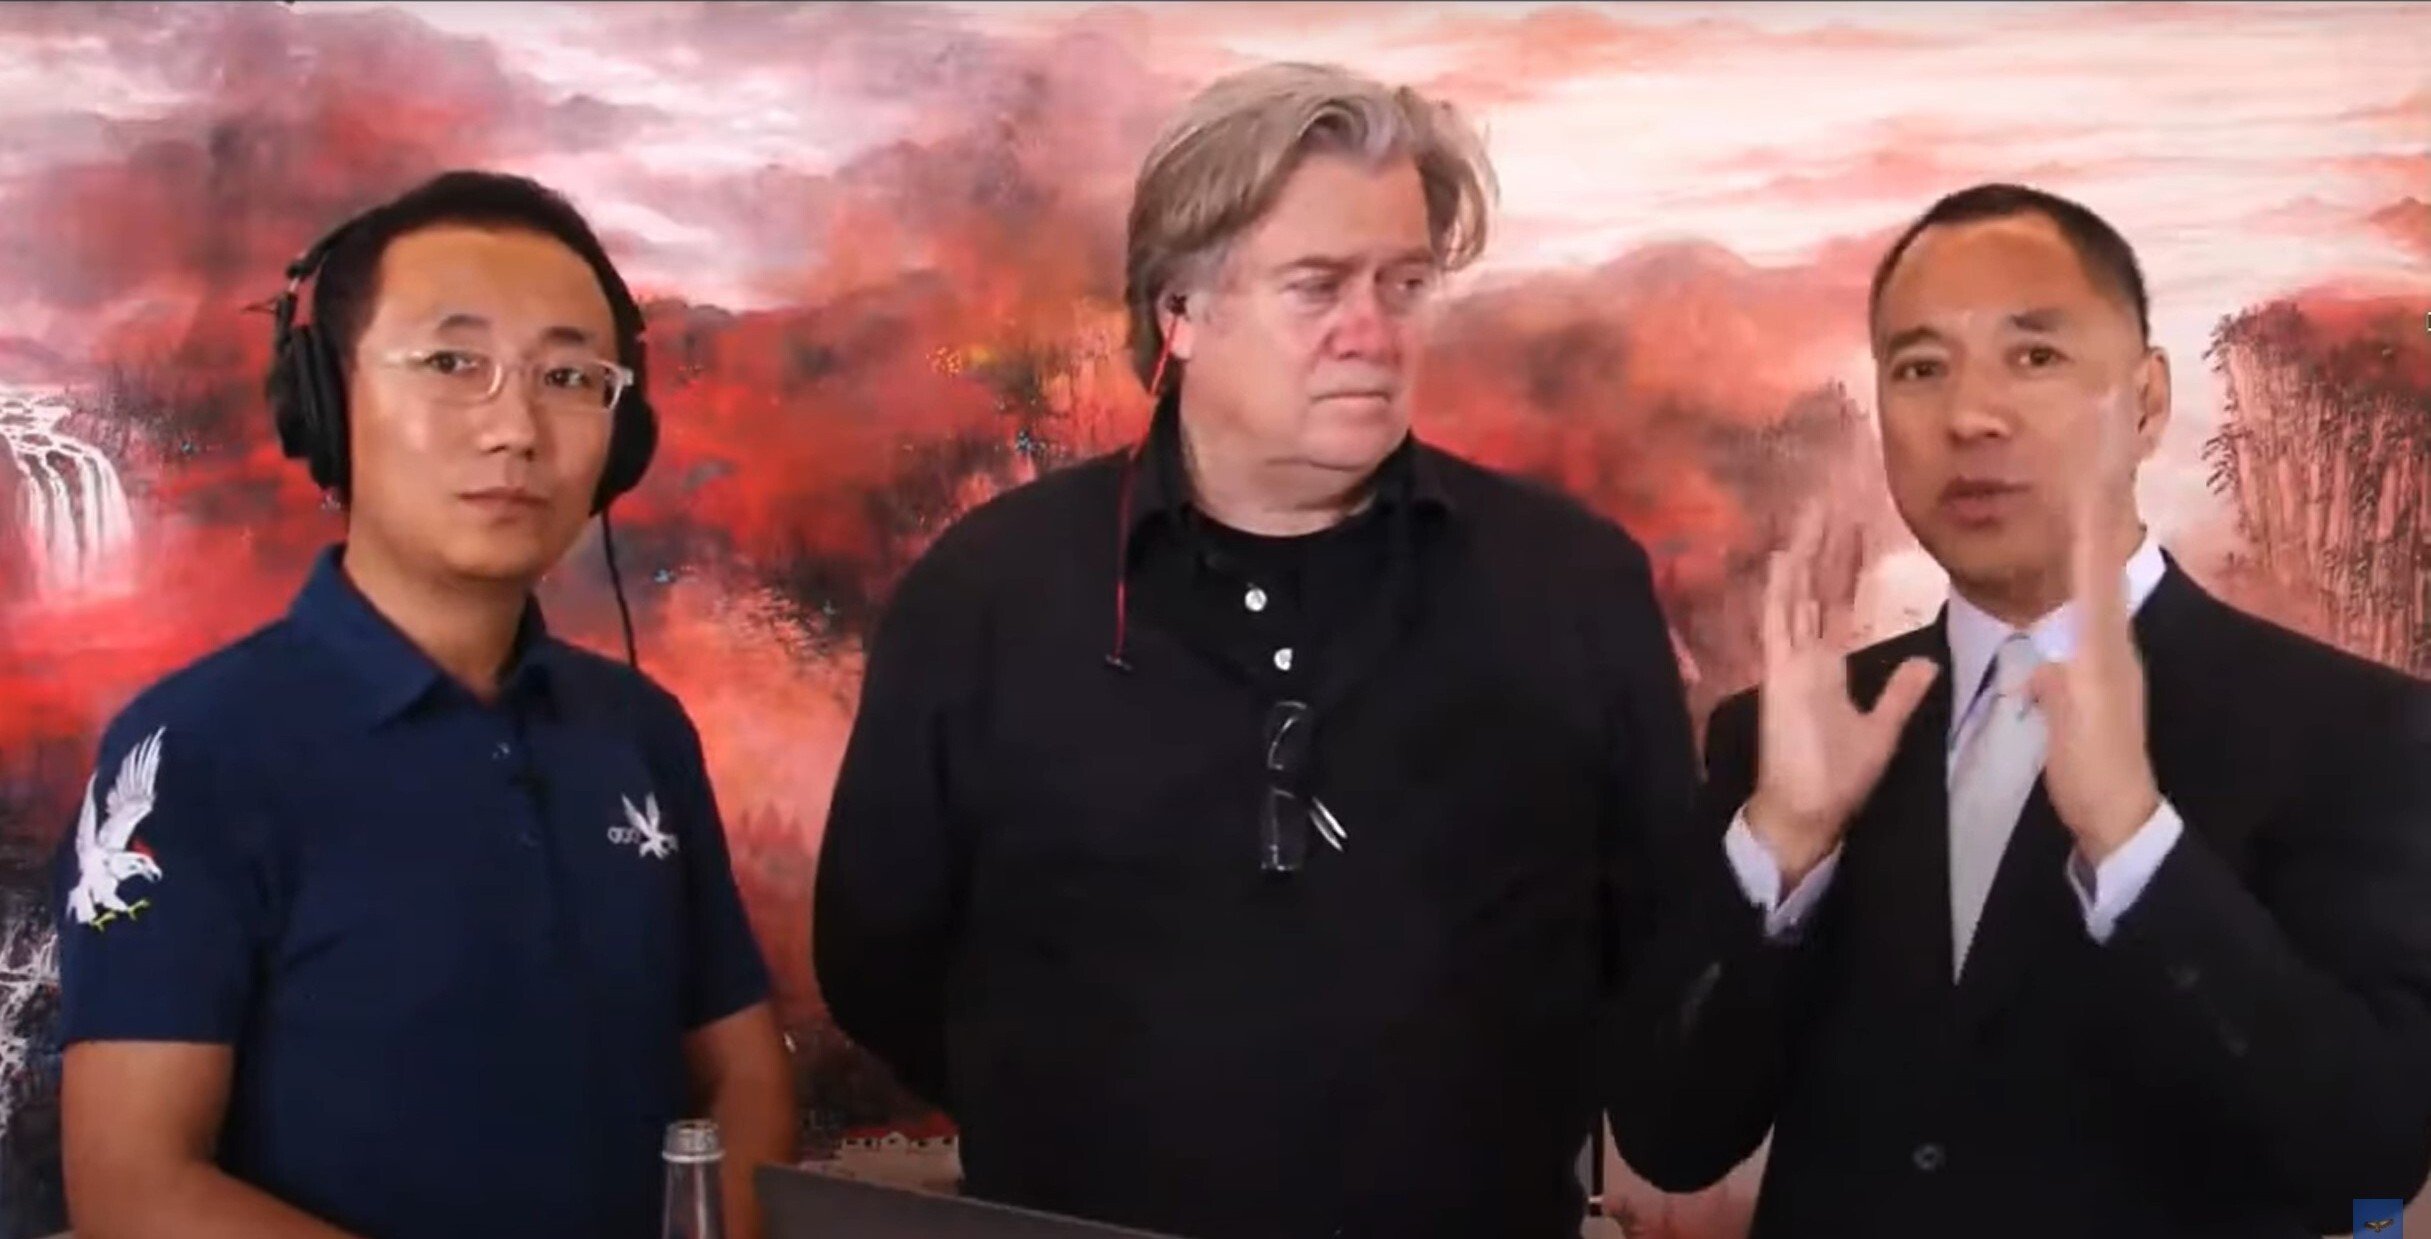 John Pan (left) pictured during a live stream with Steve Bannon and Guo Wengui last year. Photo: Handout